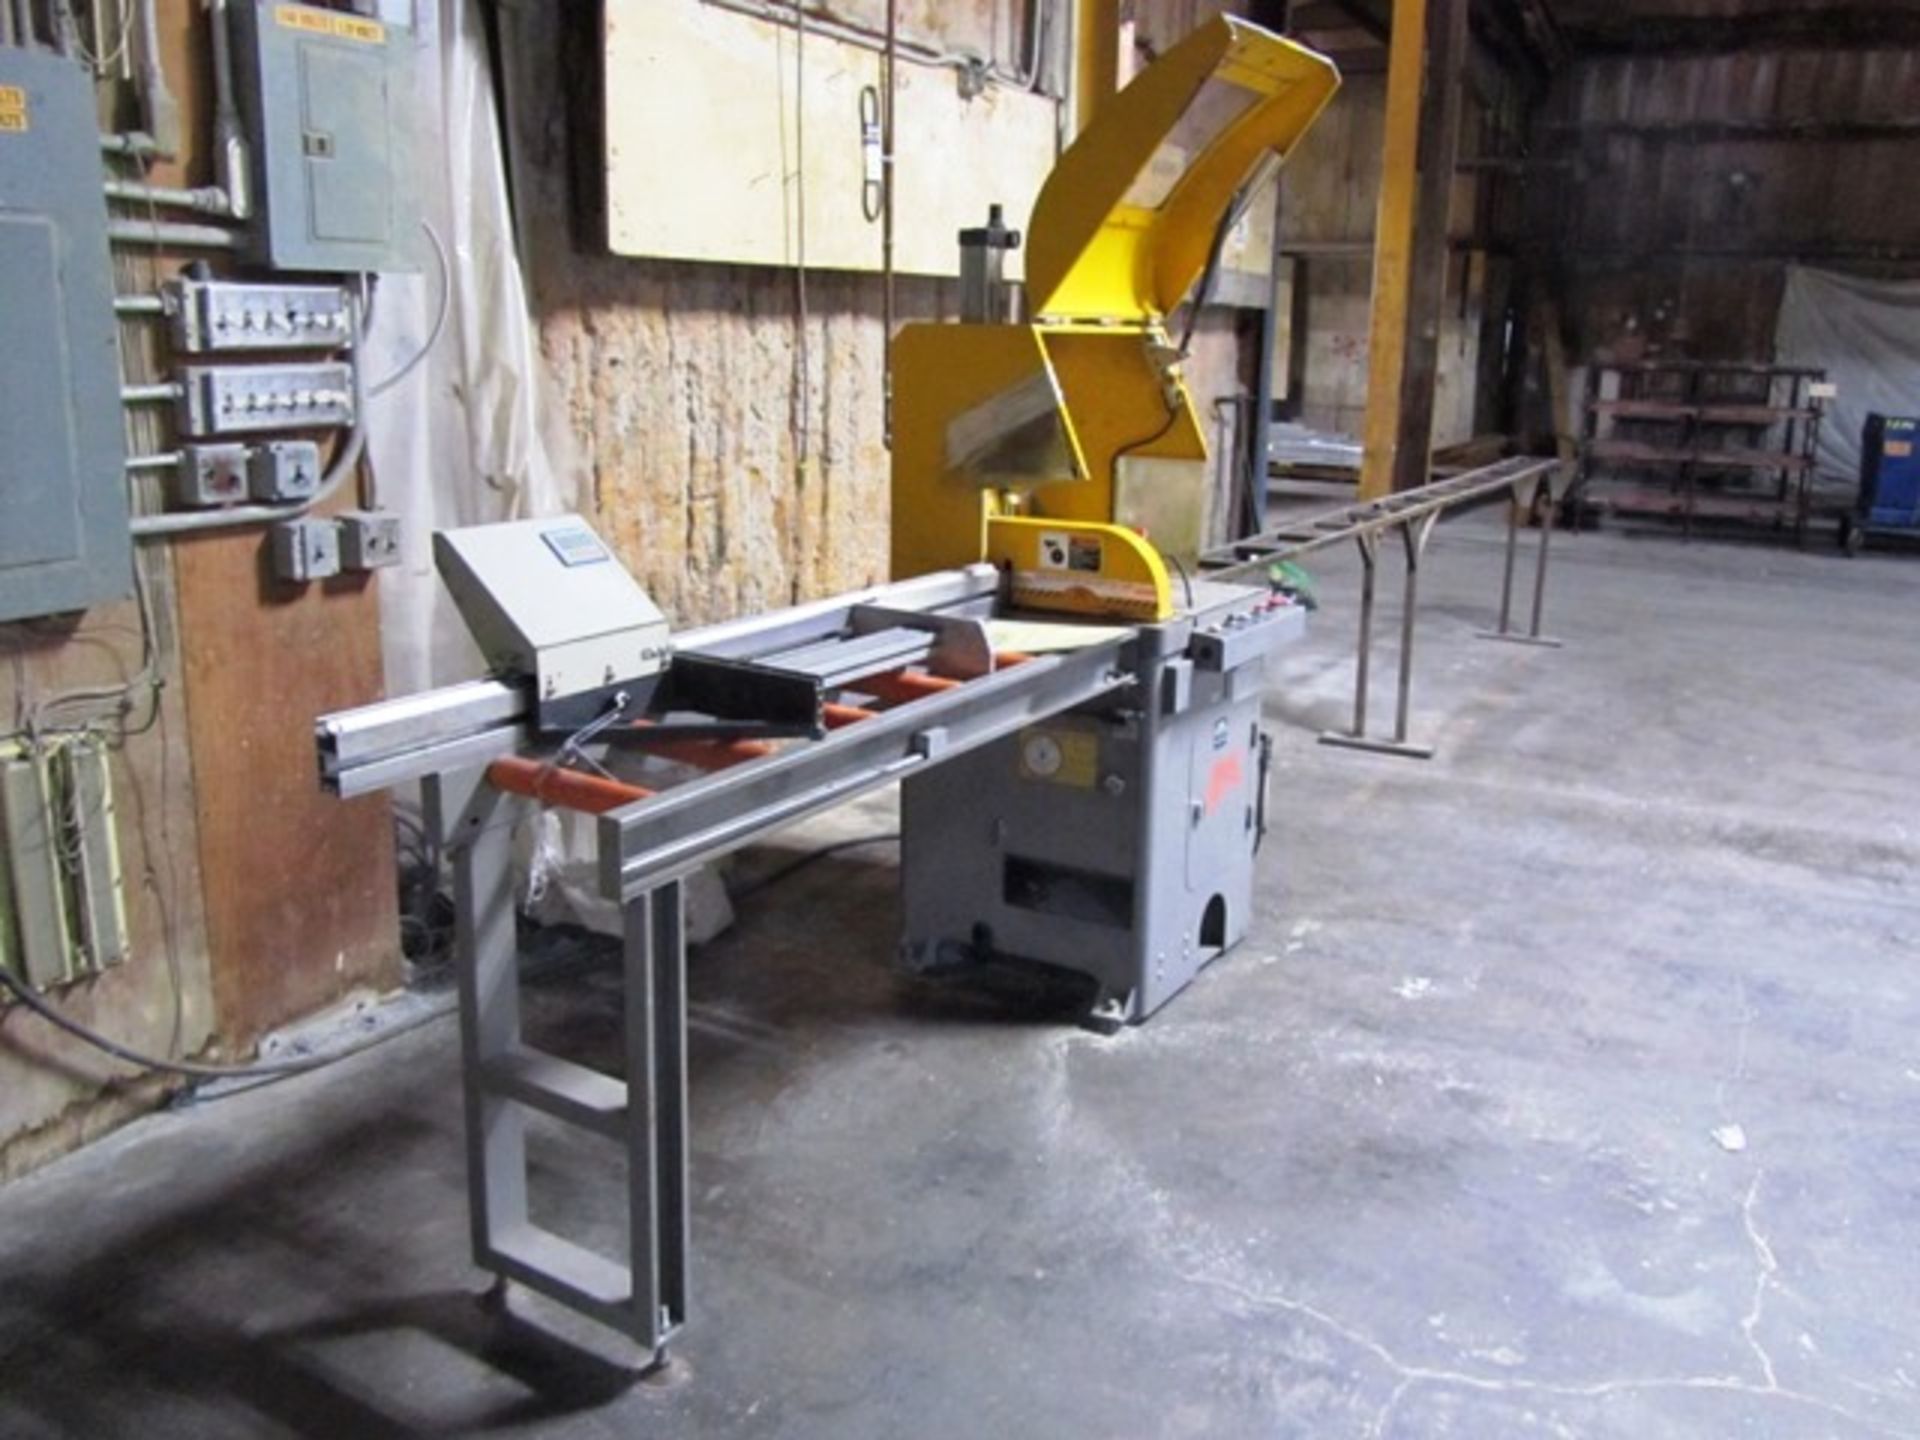 JIH-18CD Cold Saw with Digital Measuring System, 125mm x 125mm to 20mm x 300'' Capacity, Mitres to - Image 3 of 3